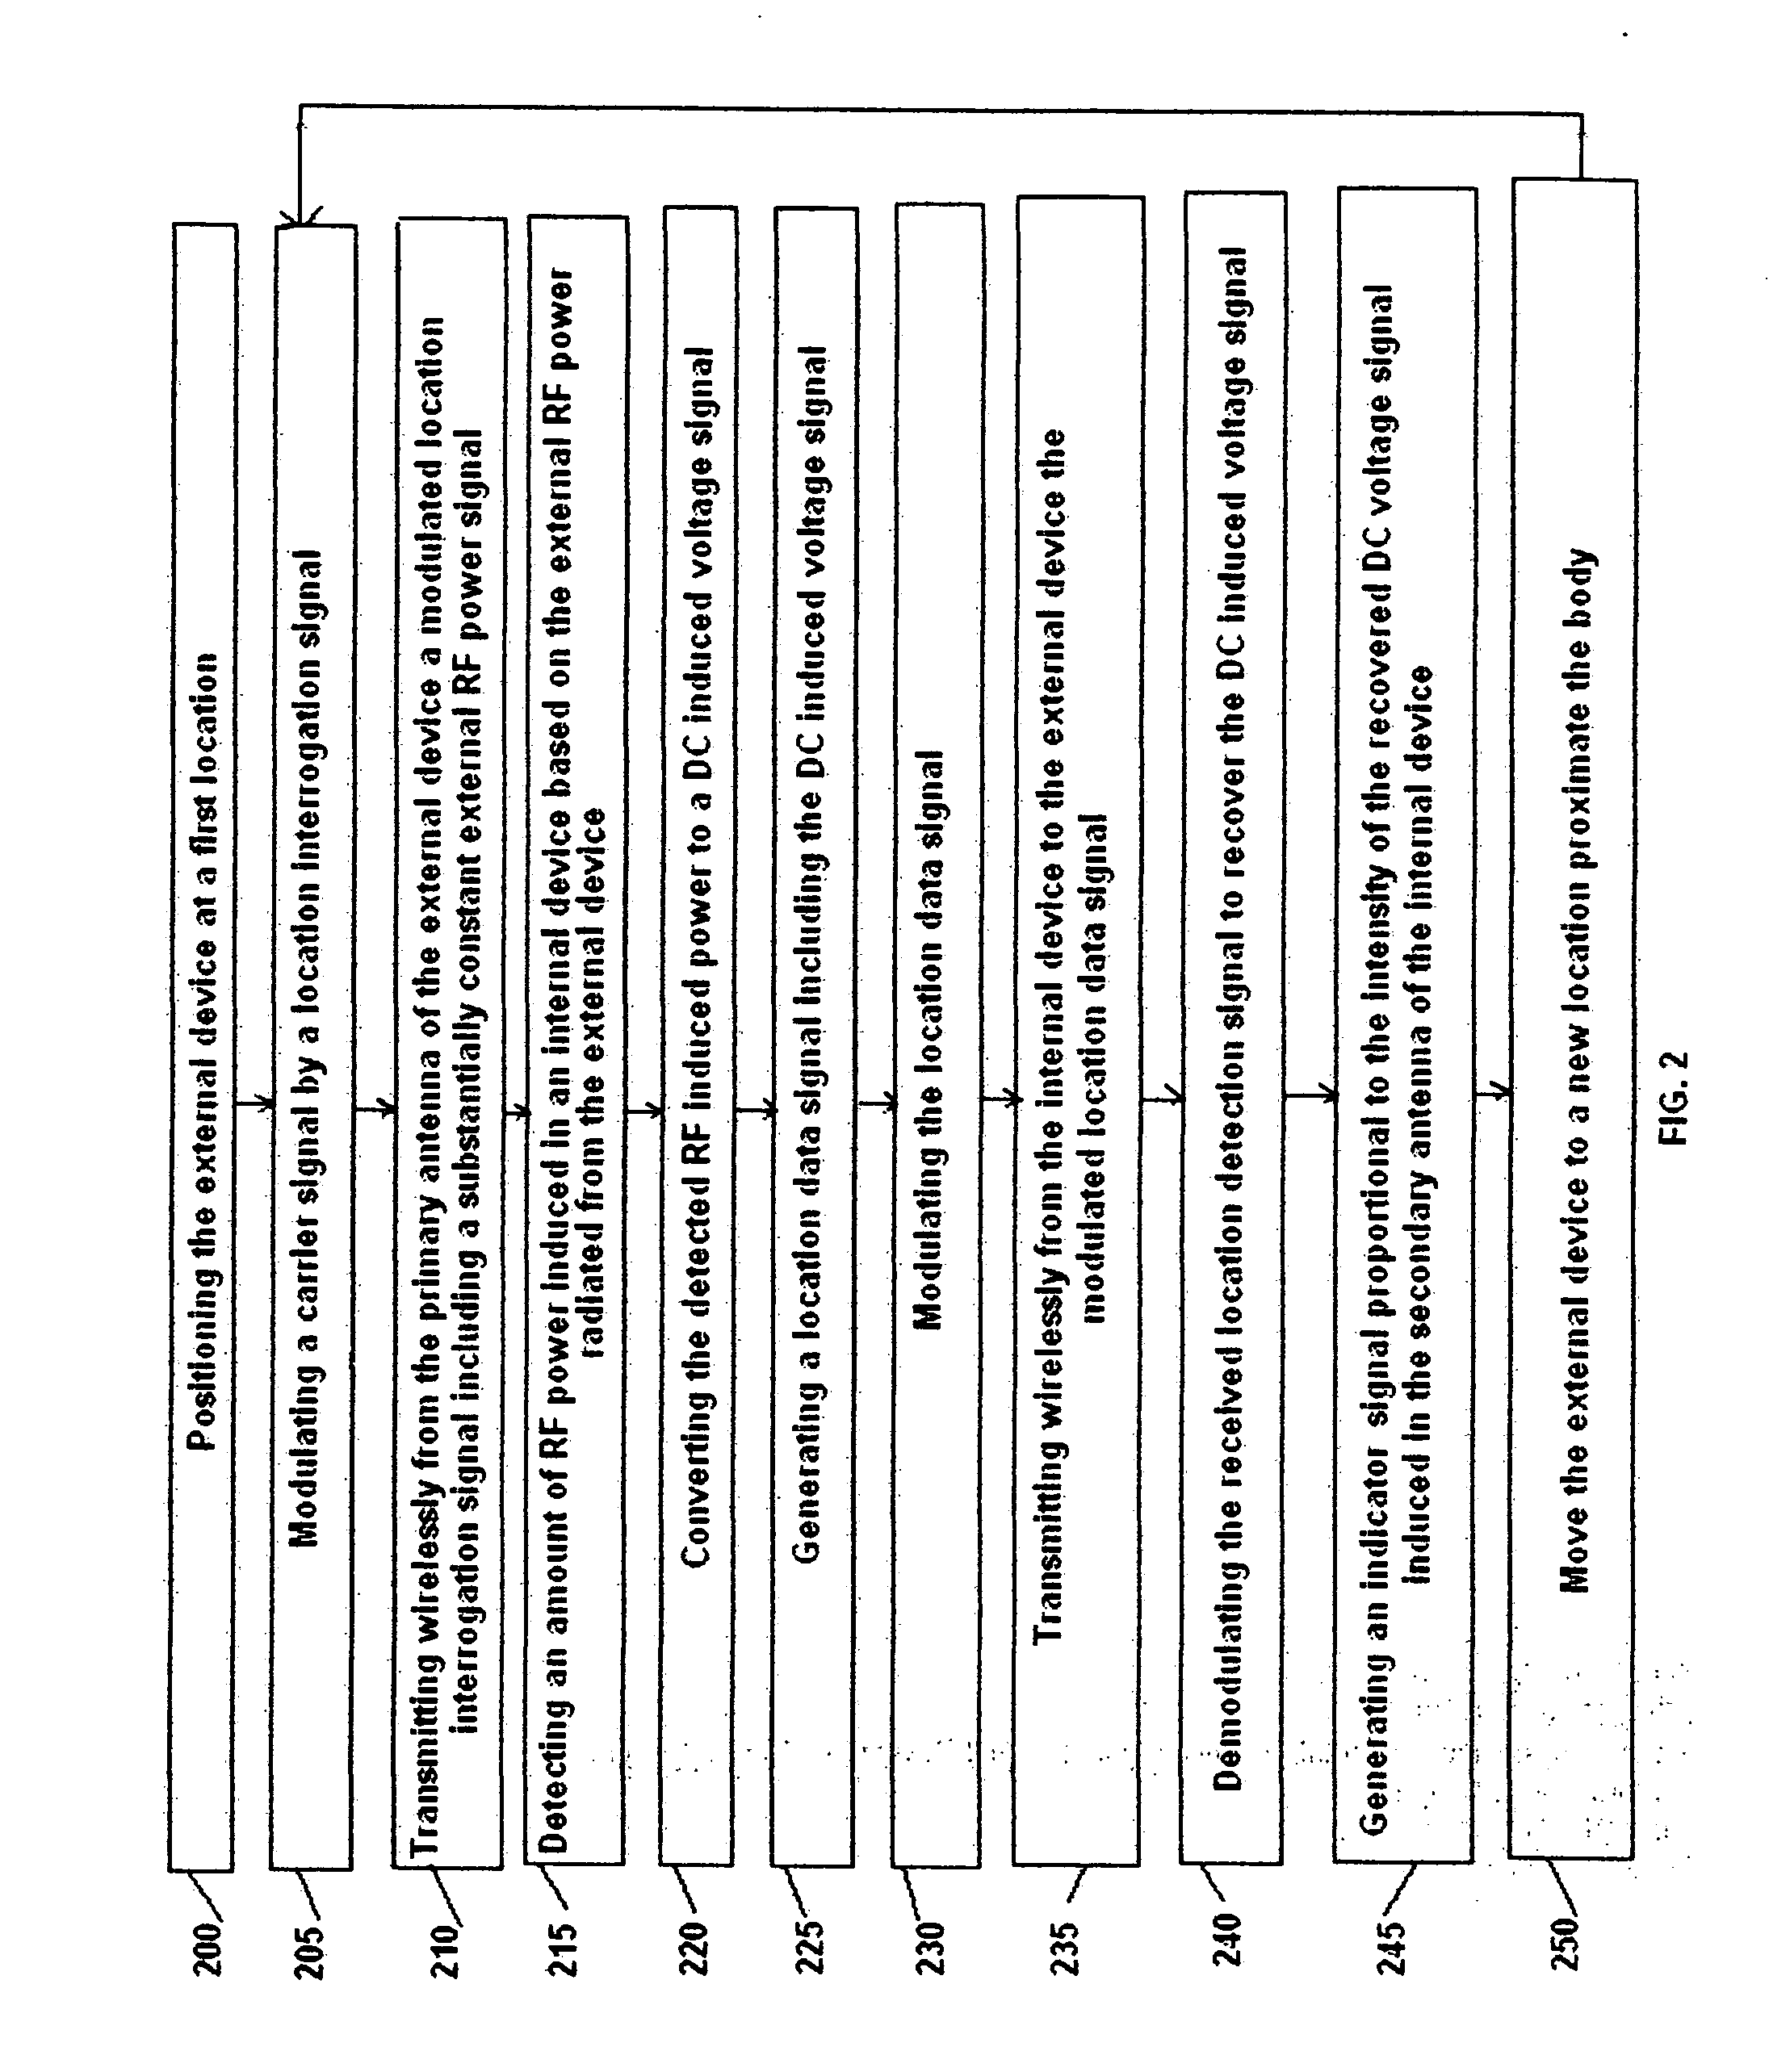 System and method for locating an internal device in a closed system